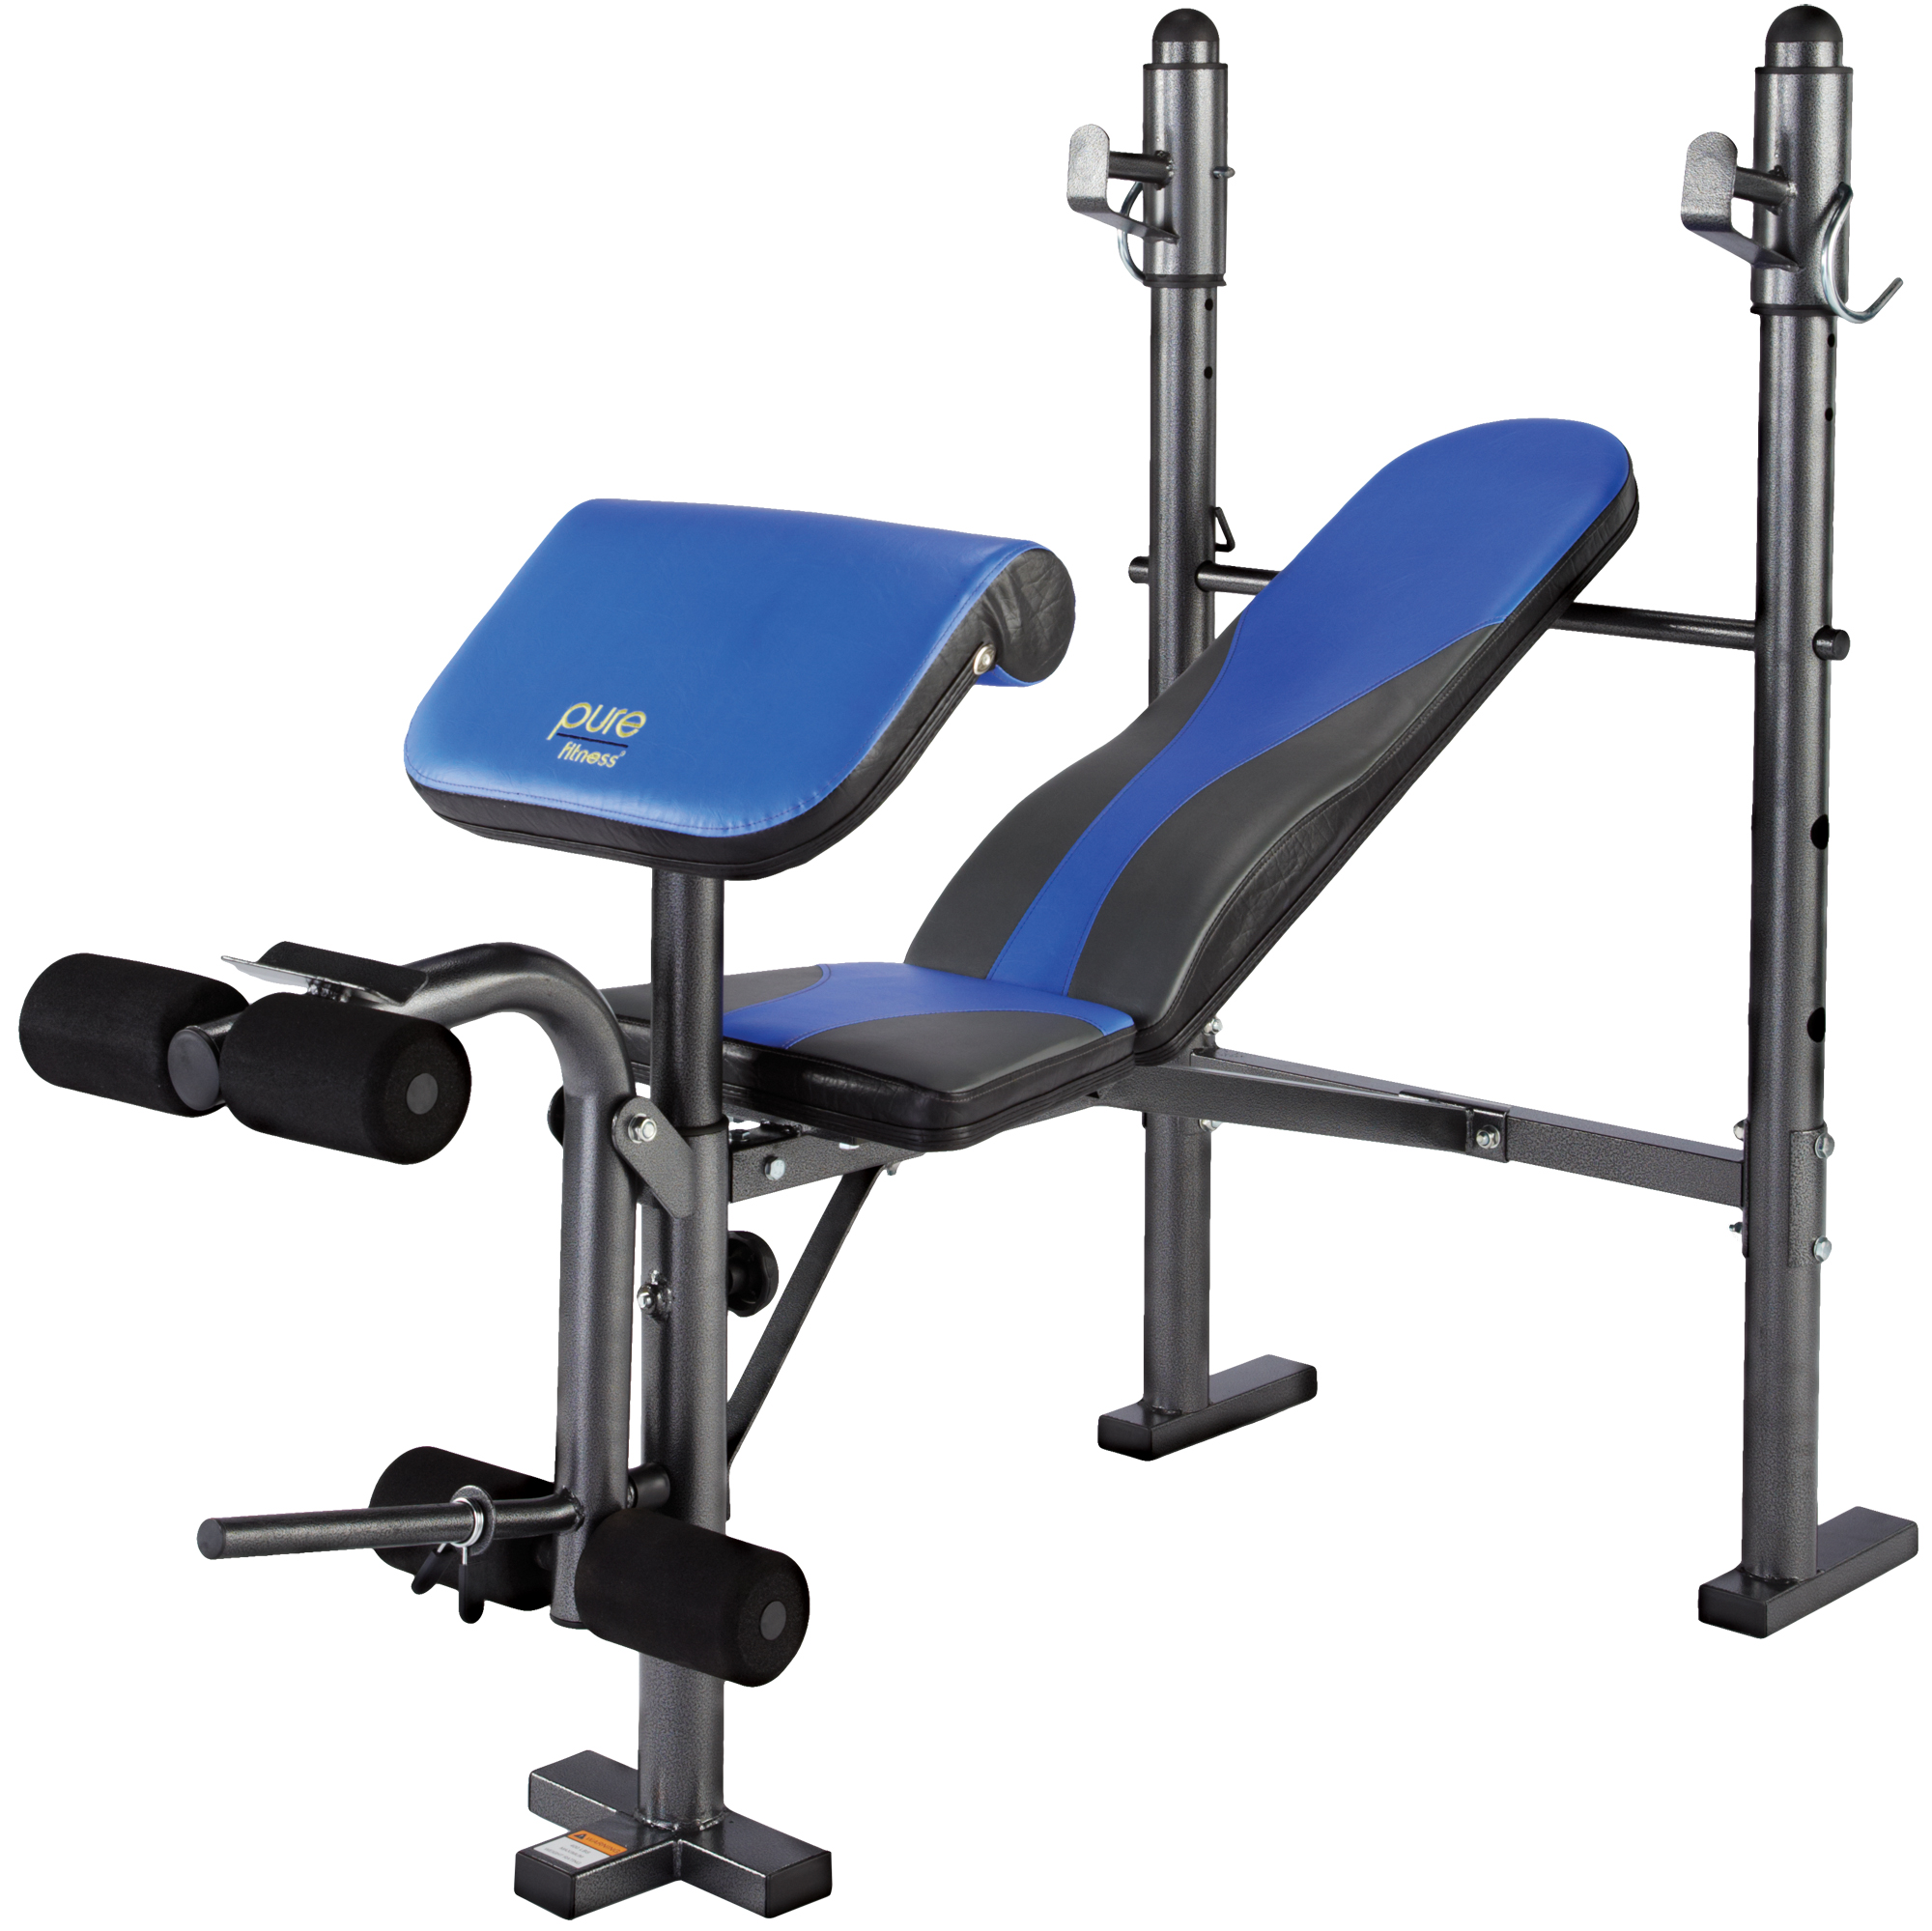 Pure Fitness Multi Purpose Mid Width Weight Bench - image 1 of 8